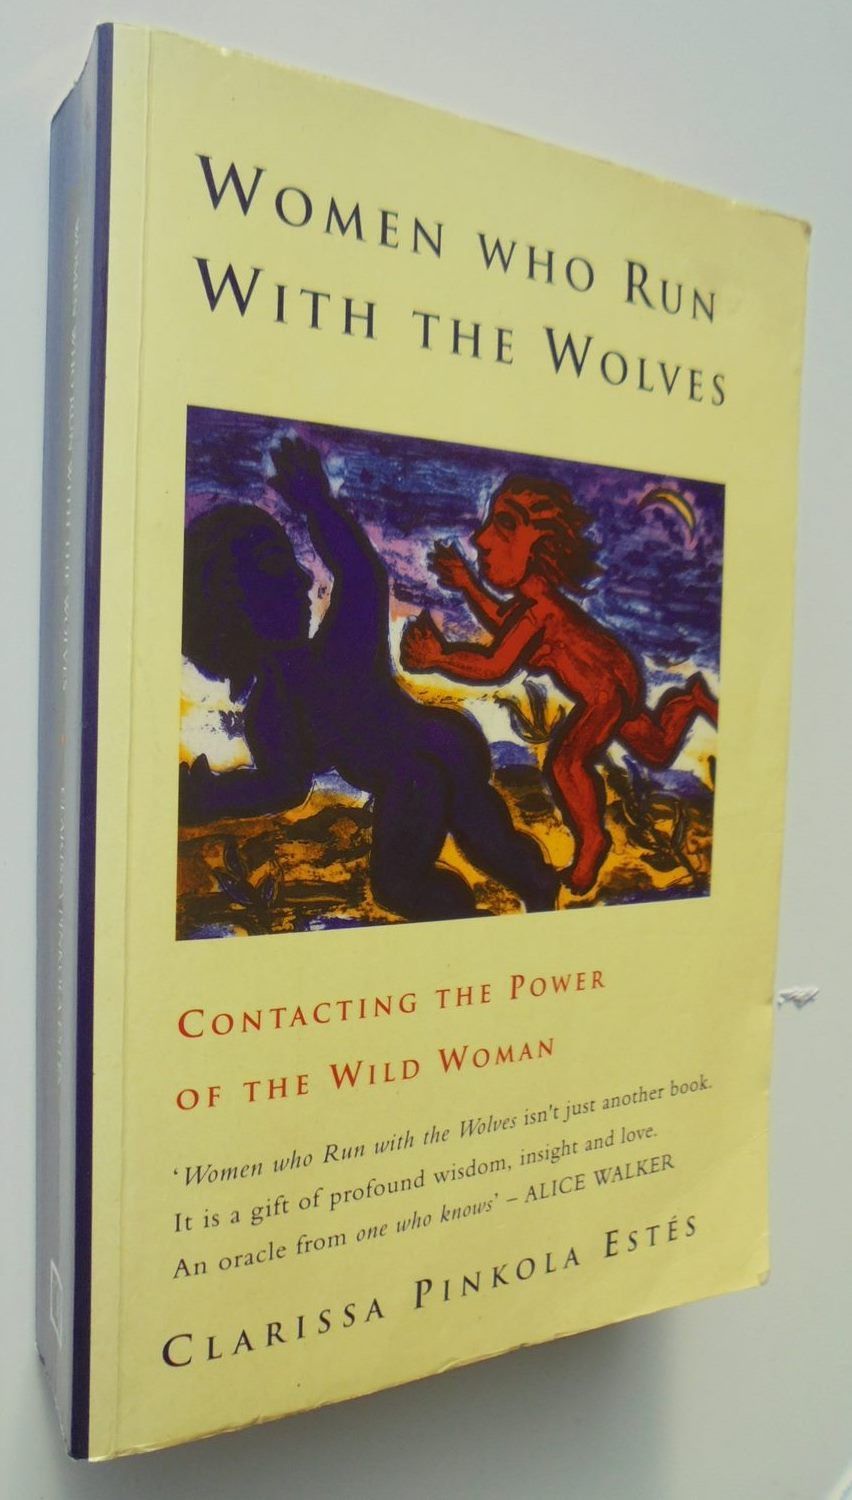 WOMEN WHO RUN WITH THE WOLVES: CONTACTING THE POWER OF THE WILD WOMAN by Clarissa Pinkola Estes